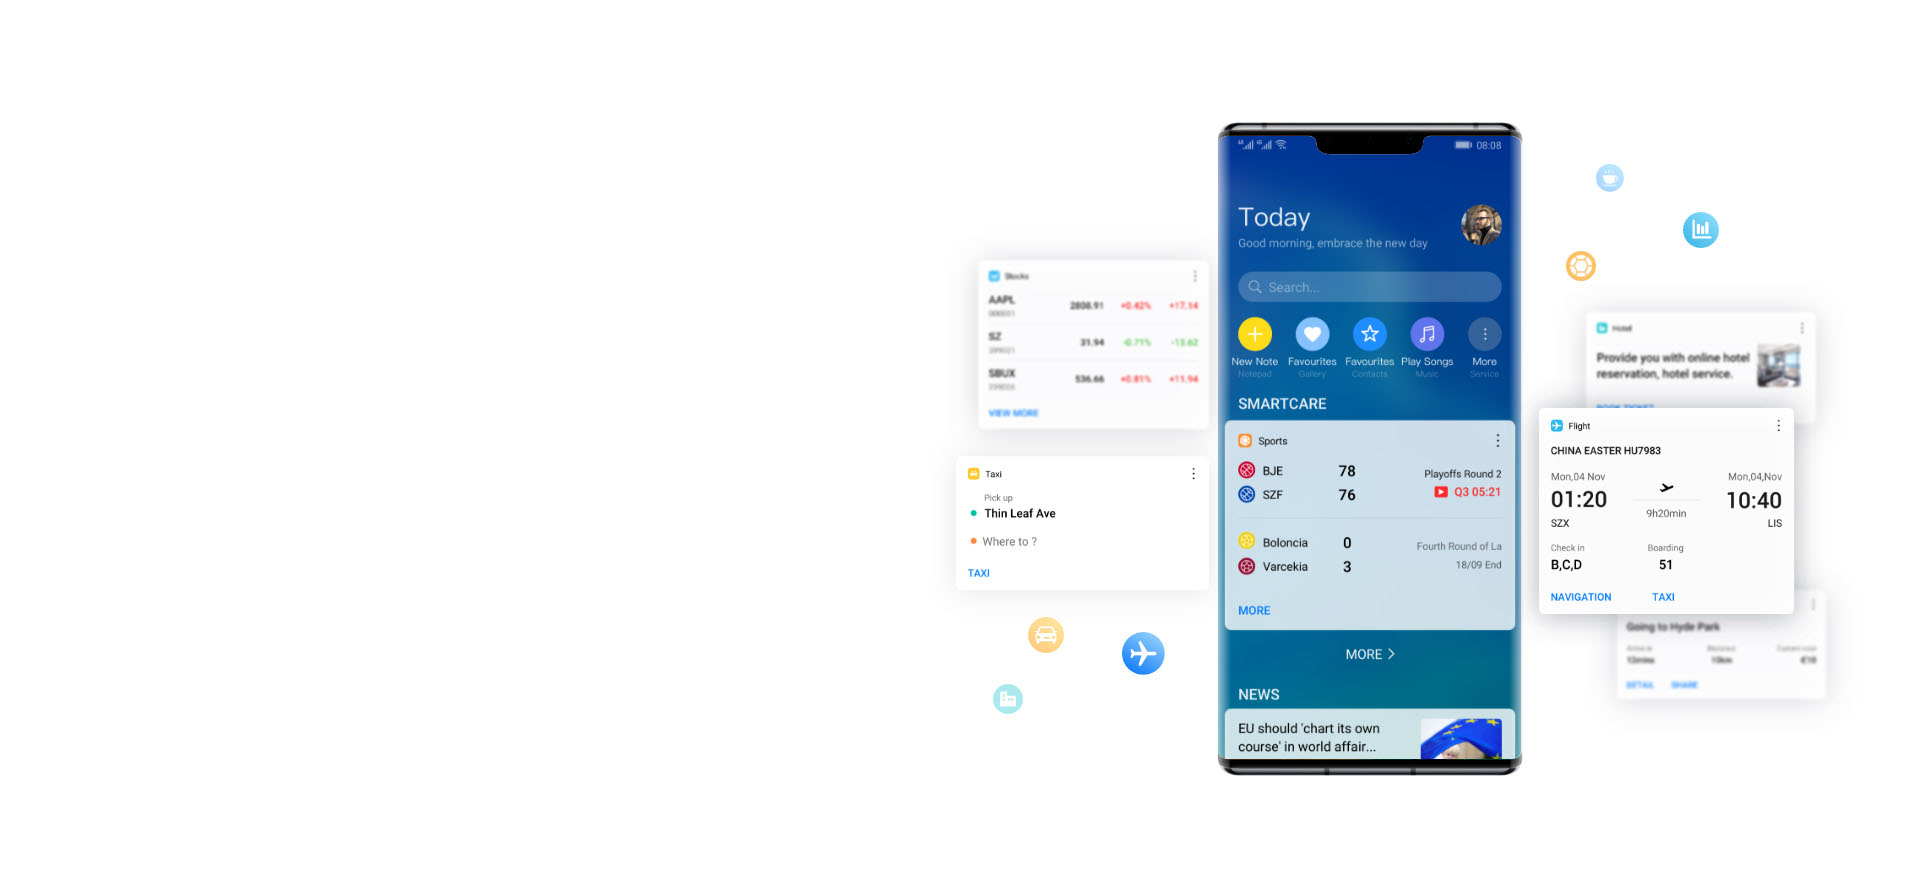 HUAWEI Assistant